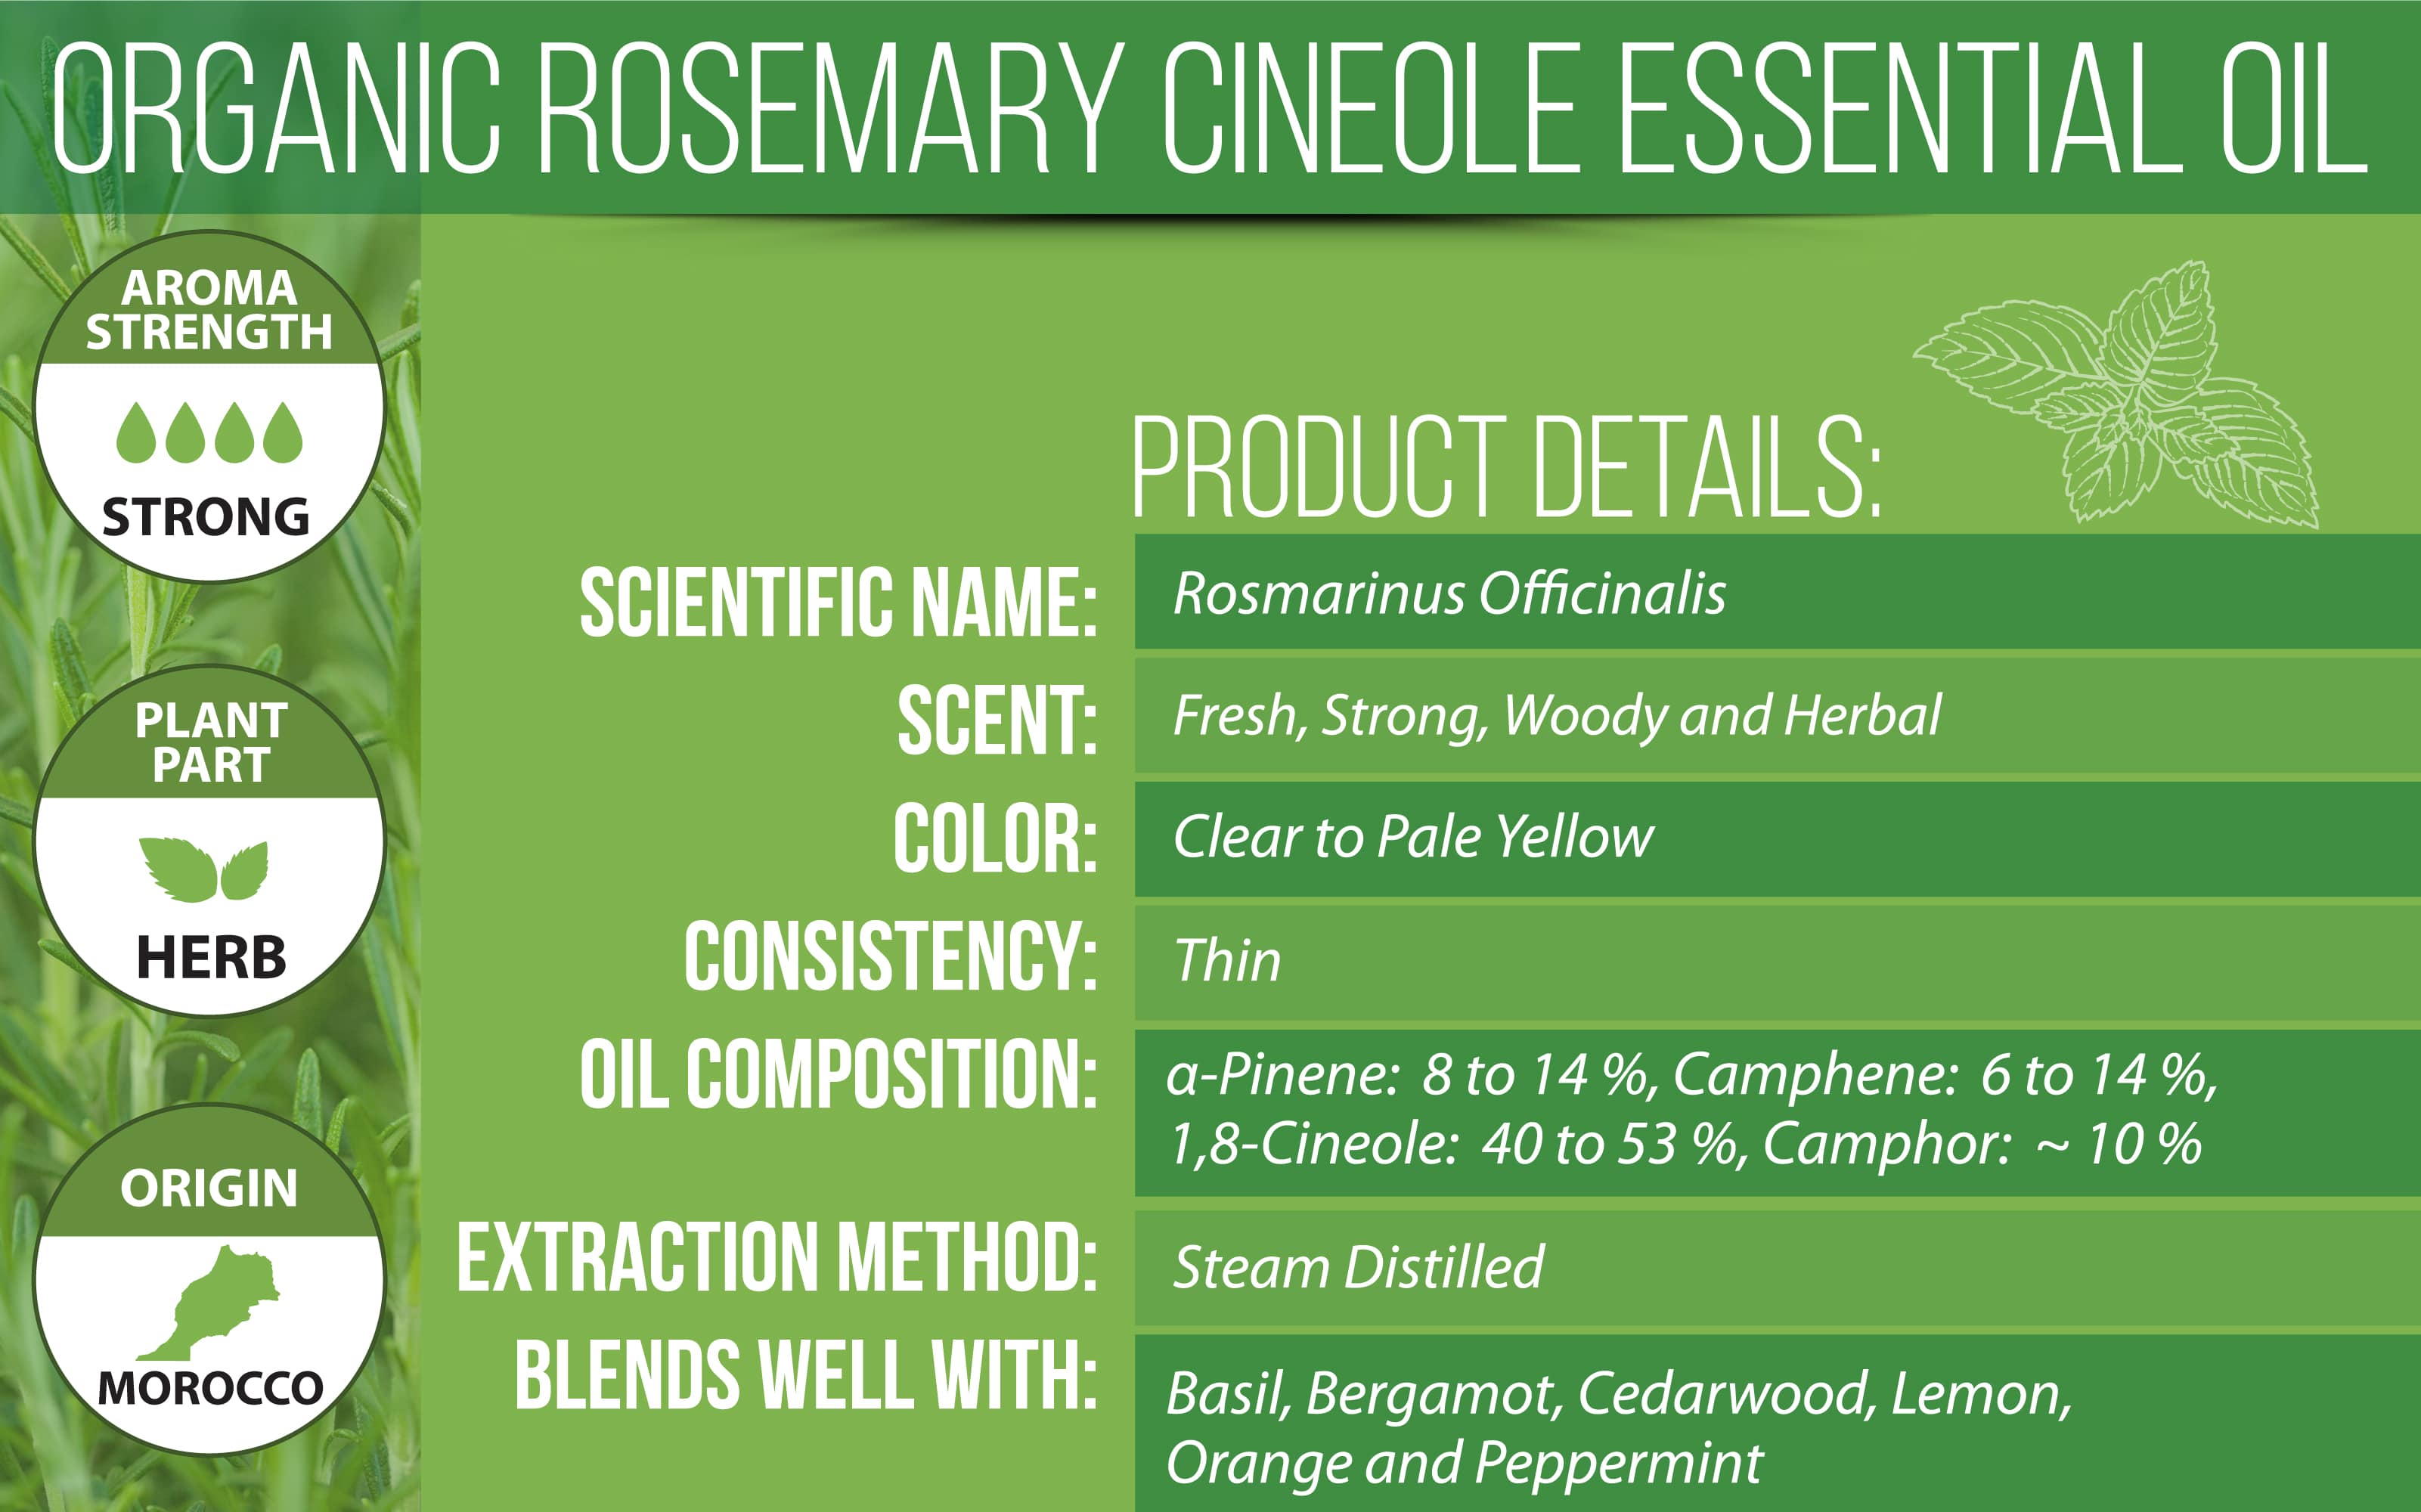 Organic Rosemary Essential Oil Product Details